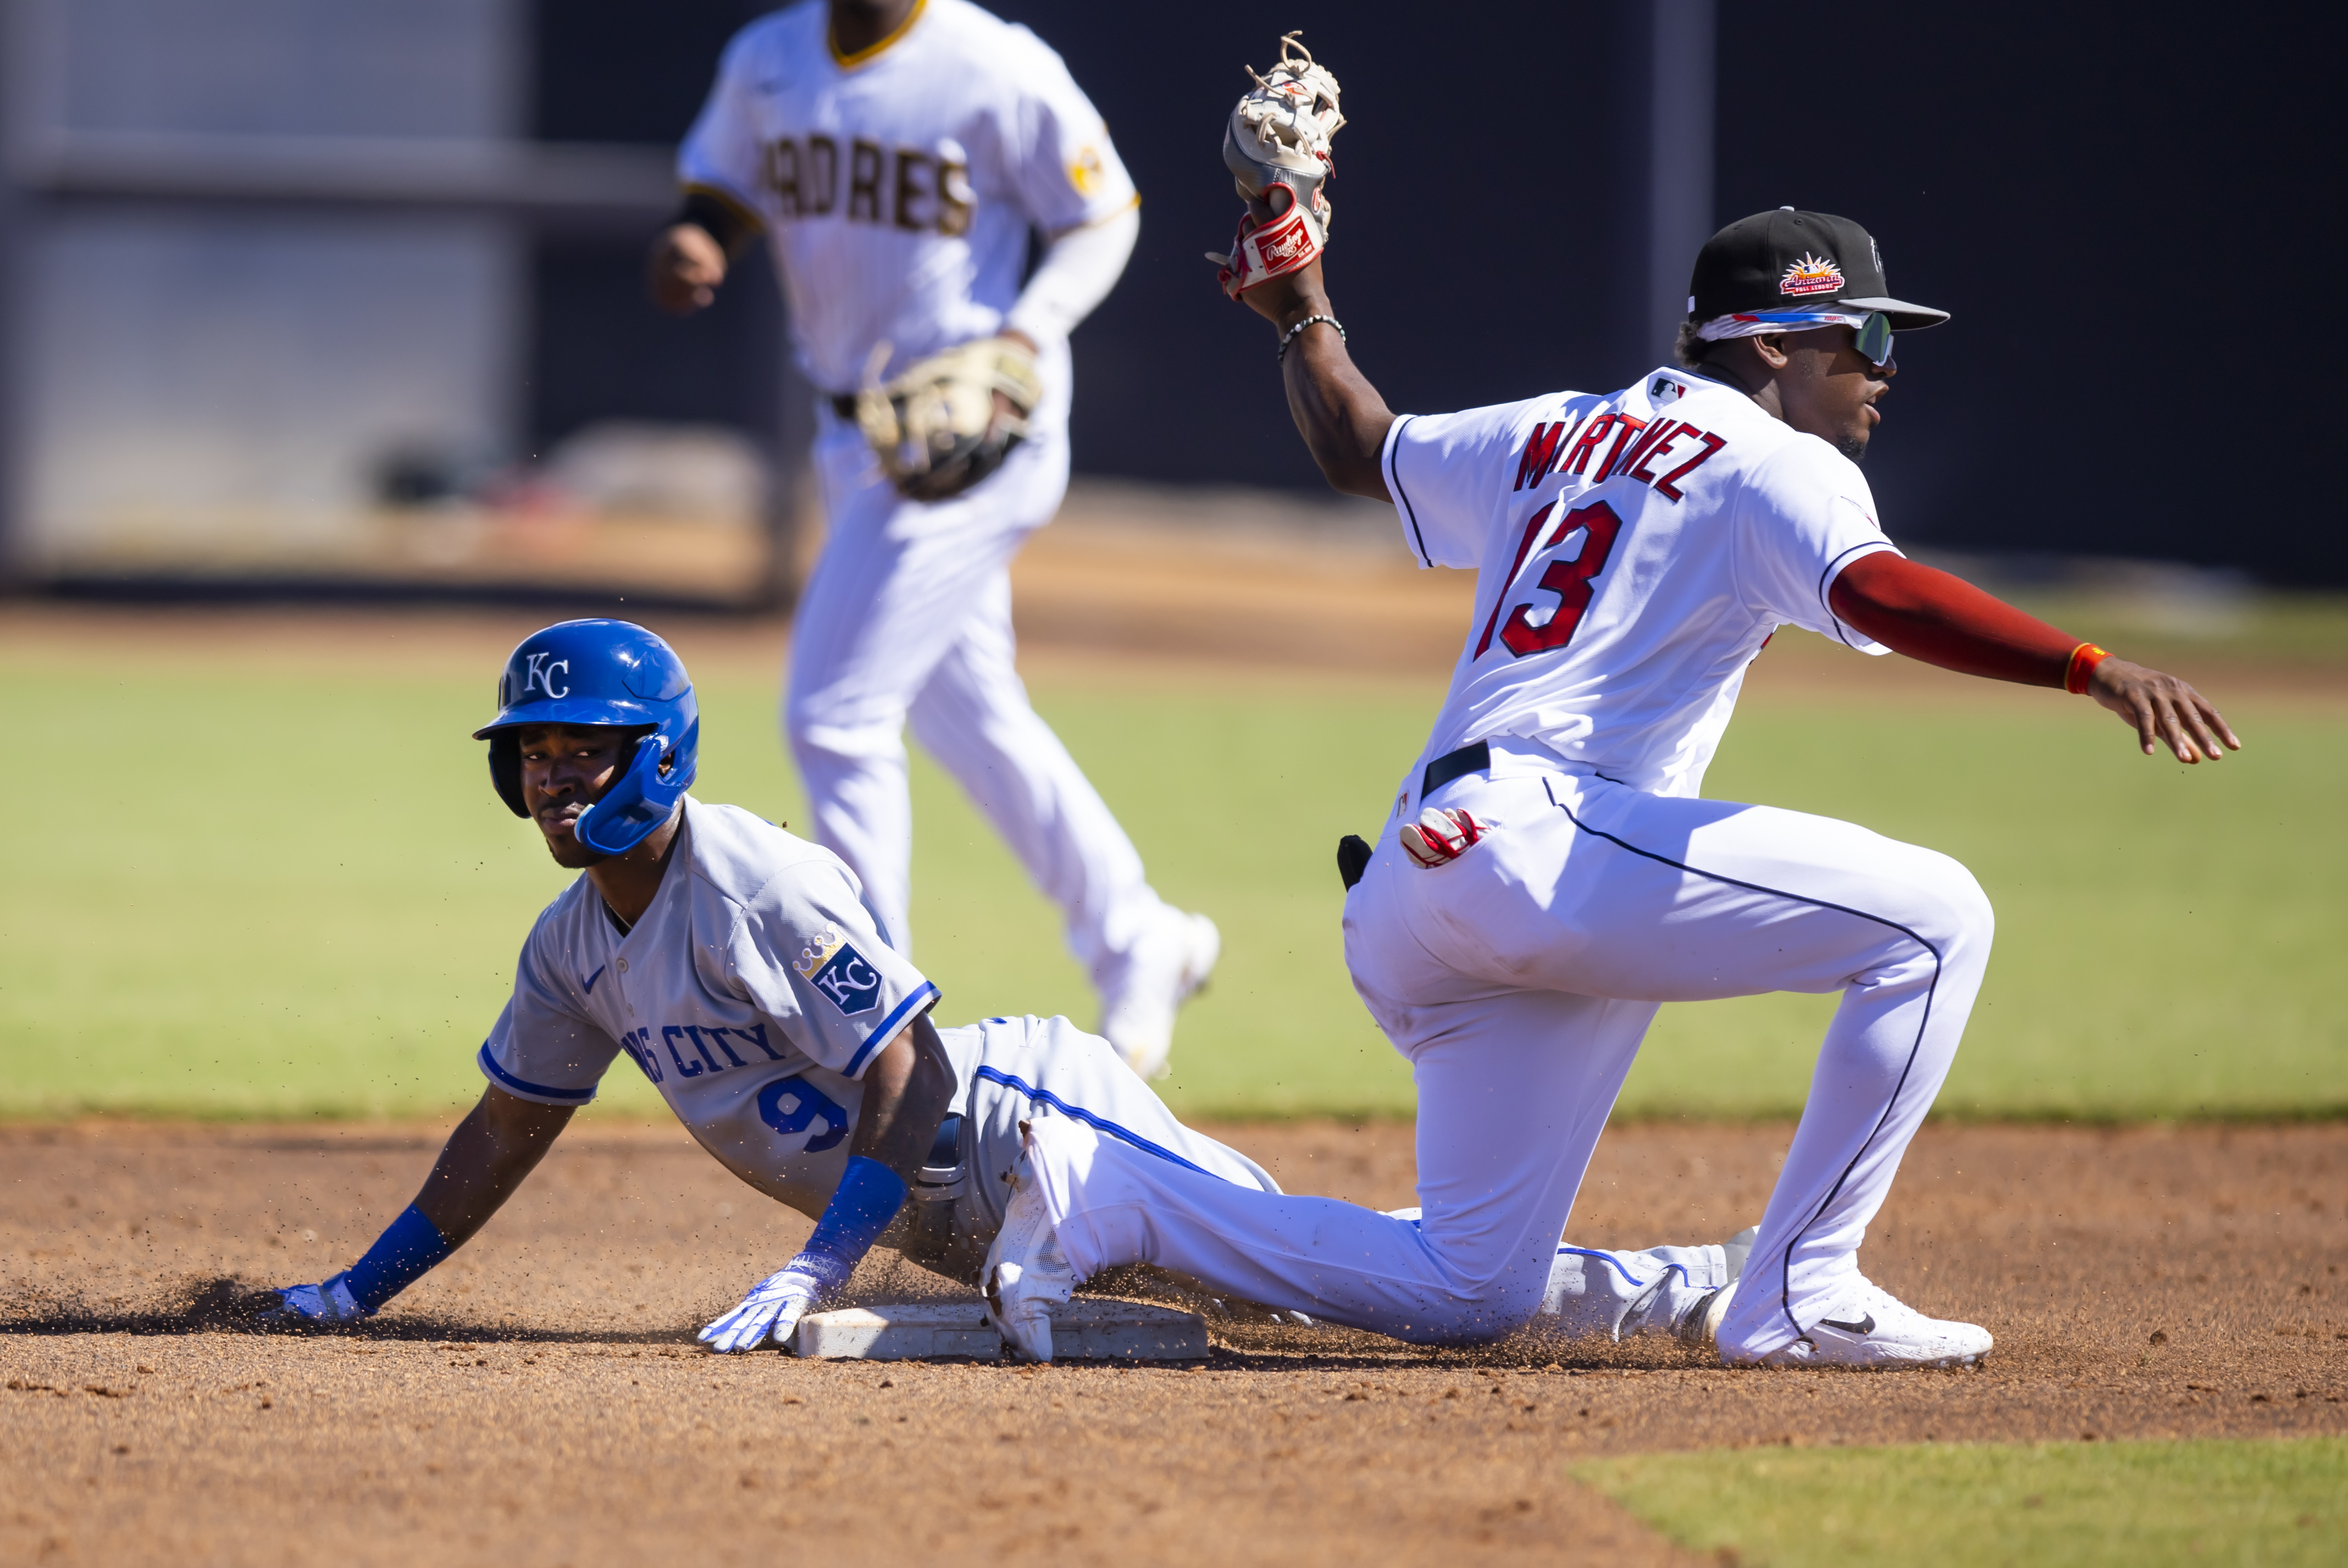 Oct 7, 2022; Peoria, Arizona, USA; Kansas City Royals infielder Samad Taylor (9) of the Surprise Saguaros steals second base ahead of the tag by Cleveland Guardians infielder Angel Martinez for the Peoria Javelinas during an Arizona Fall League baseball game at Peoria Sports Complex. Mandatory Credit: Mark J. Rebilas-USA TODAY Sports